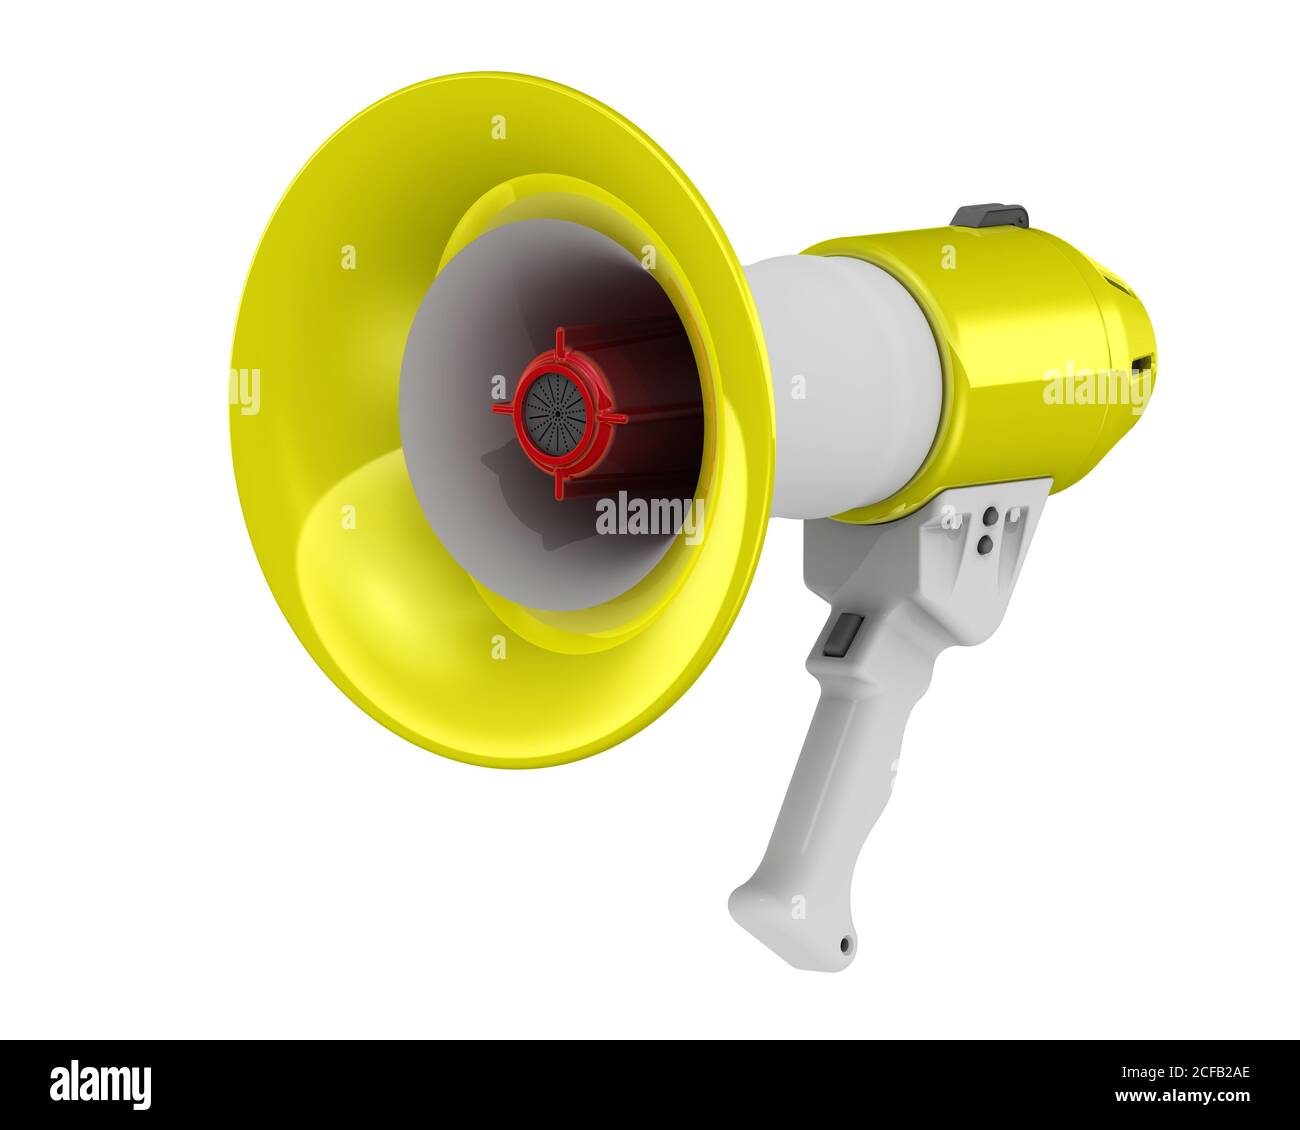 Megaphon. Electric horn. 3D illustration of a megaphone (electric horn). Isolated Stock Photo